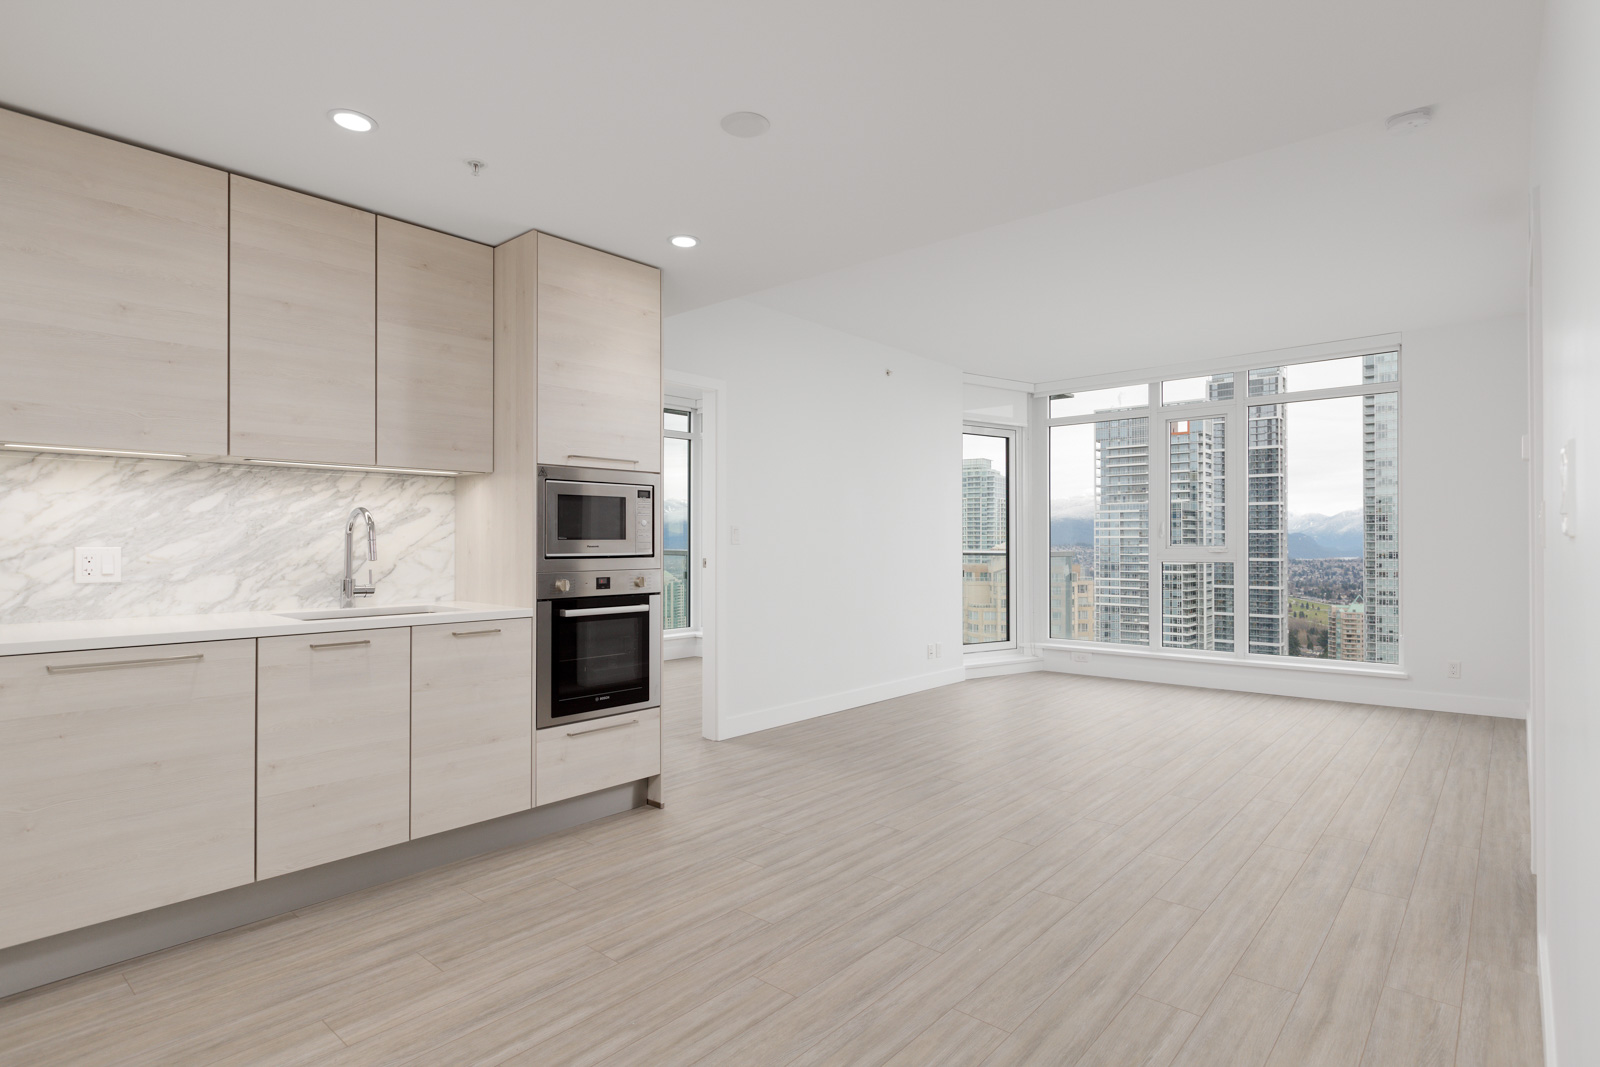 Kitchen at Sun Tower 1 building in Burnaby’s Metrotown